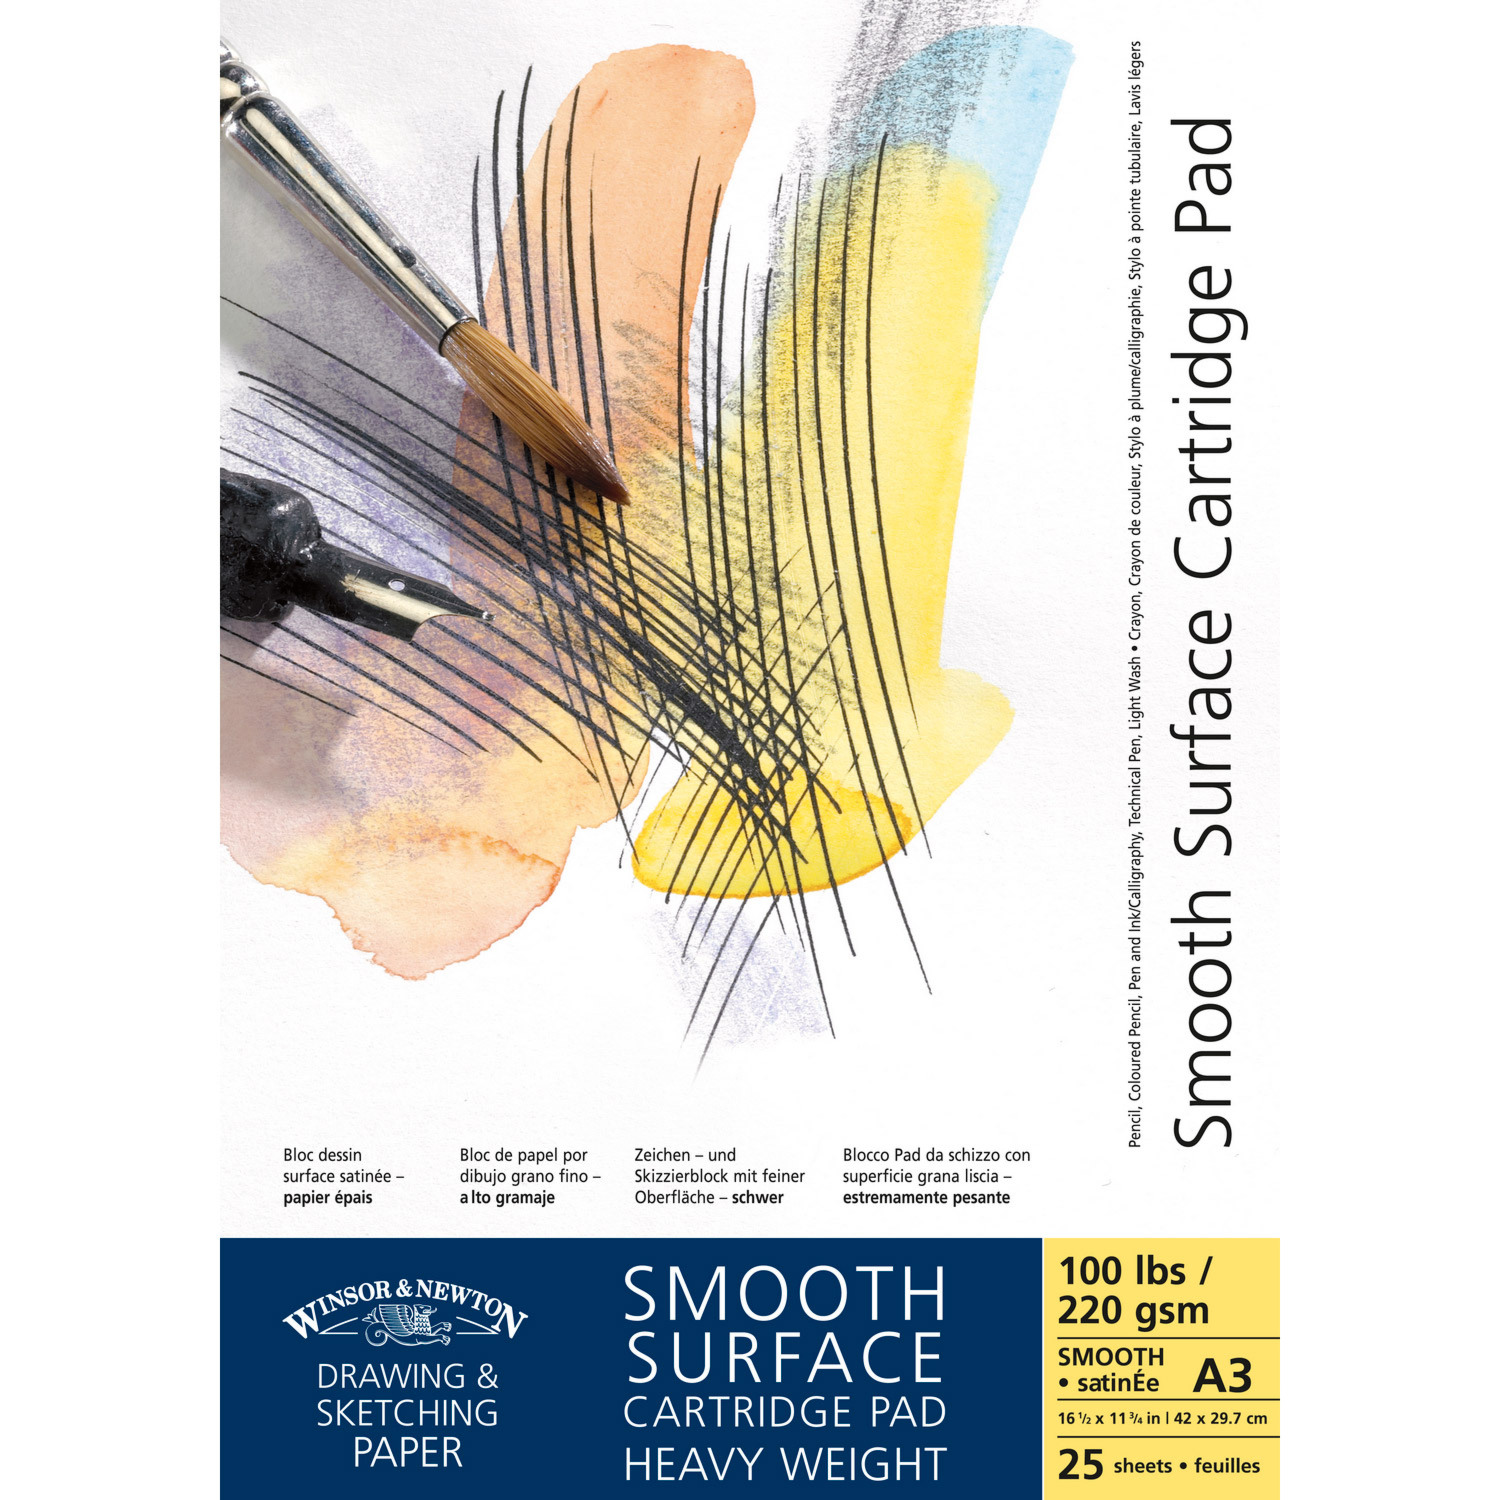 Winsor & Newton A4 Smooth Surface Cartridge Pads 25 Sheets 220gsm Image